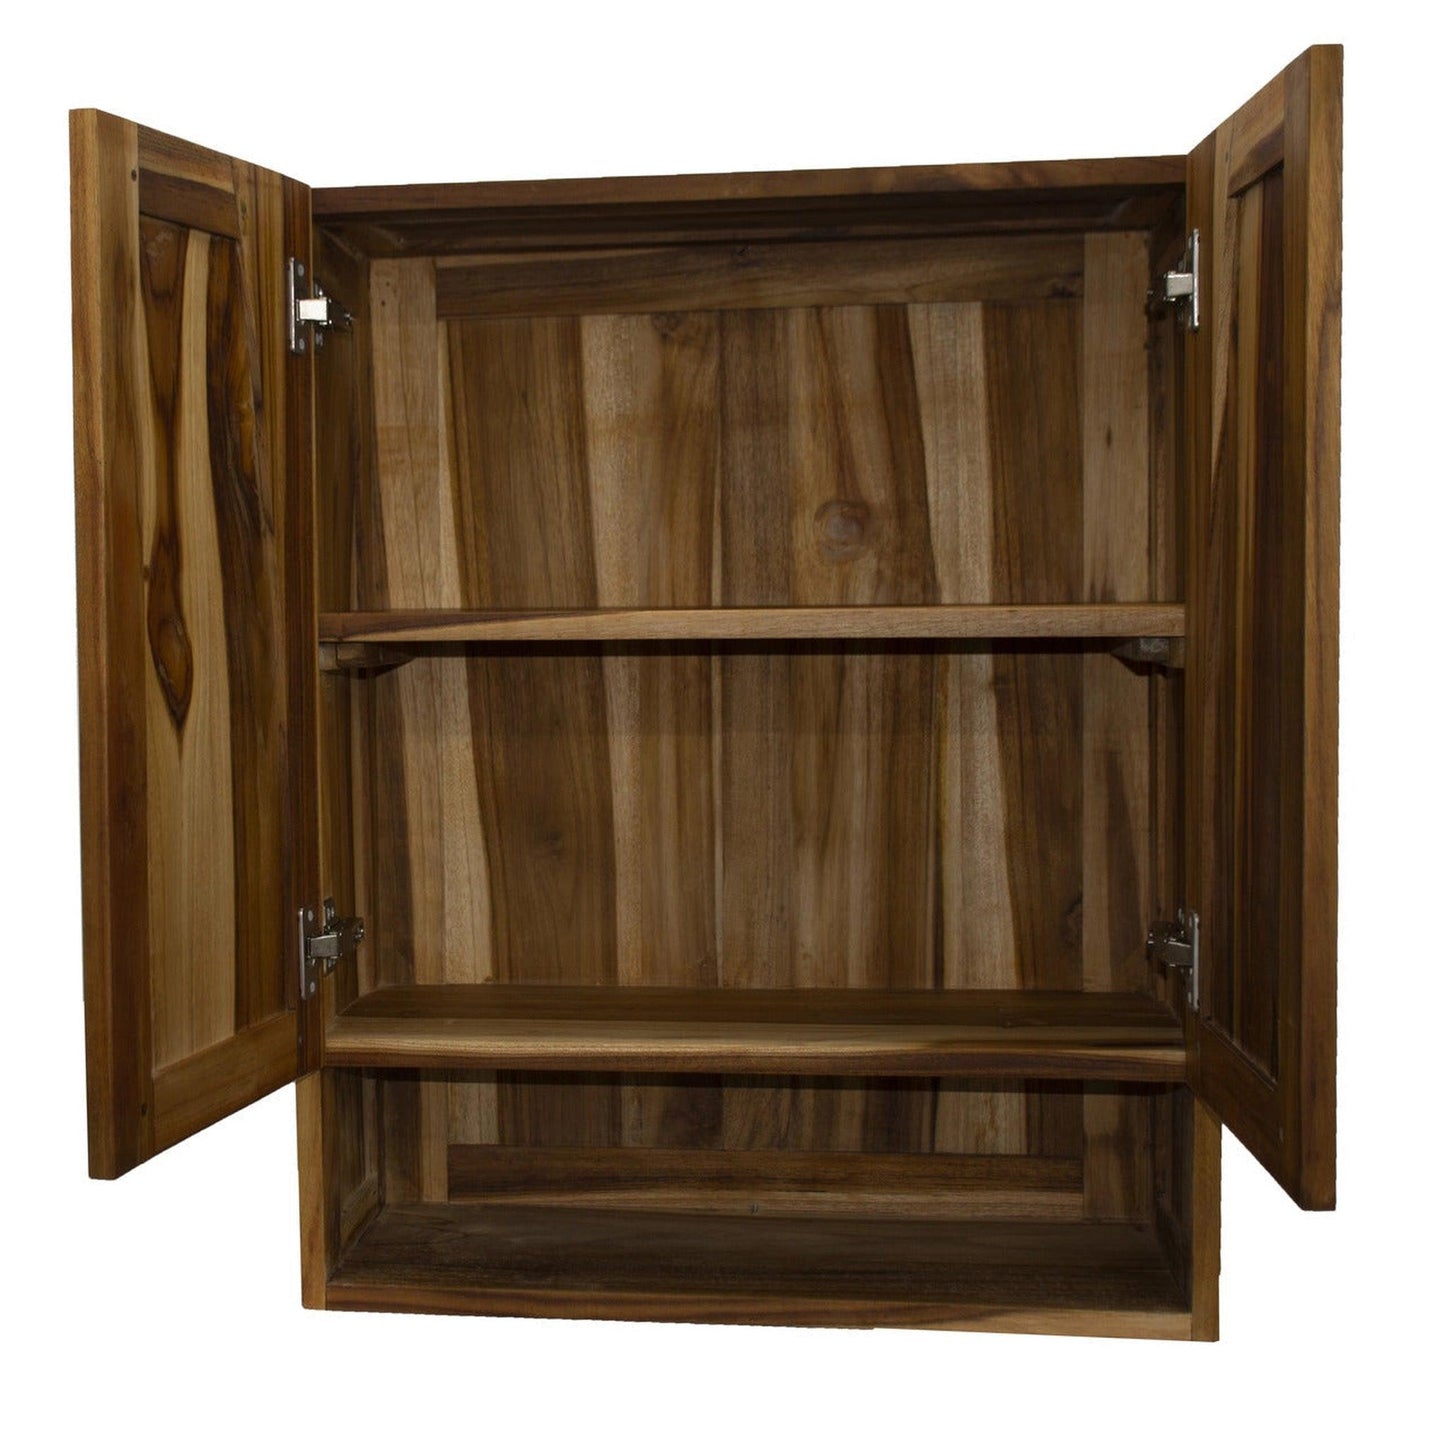 EcoDecors Curvature 24" EarthyTeak Solid Teak Wood Fully Assembled Wall Cabinet